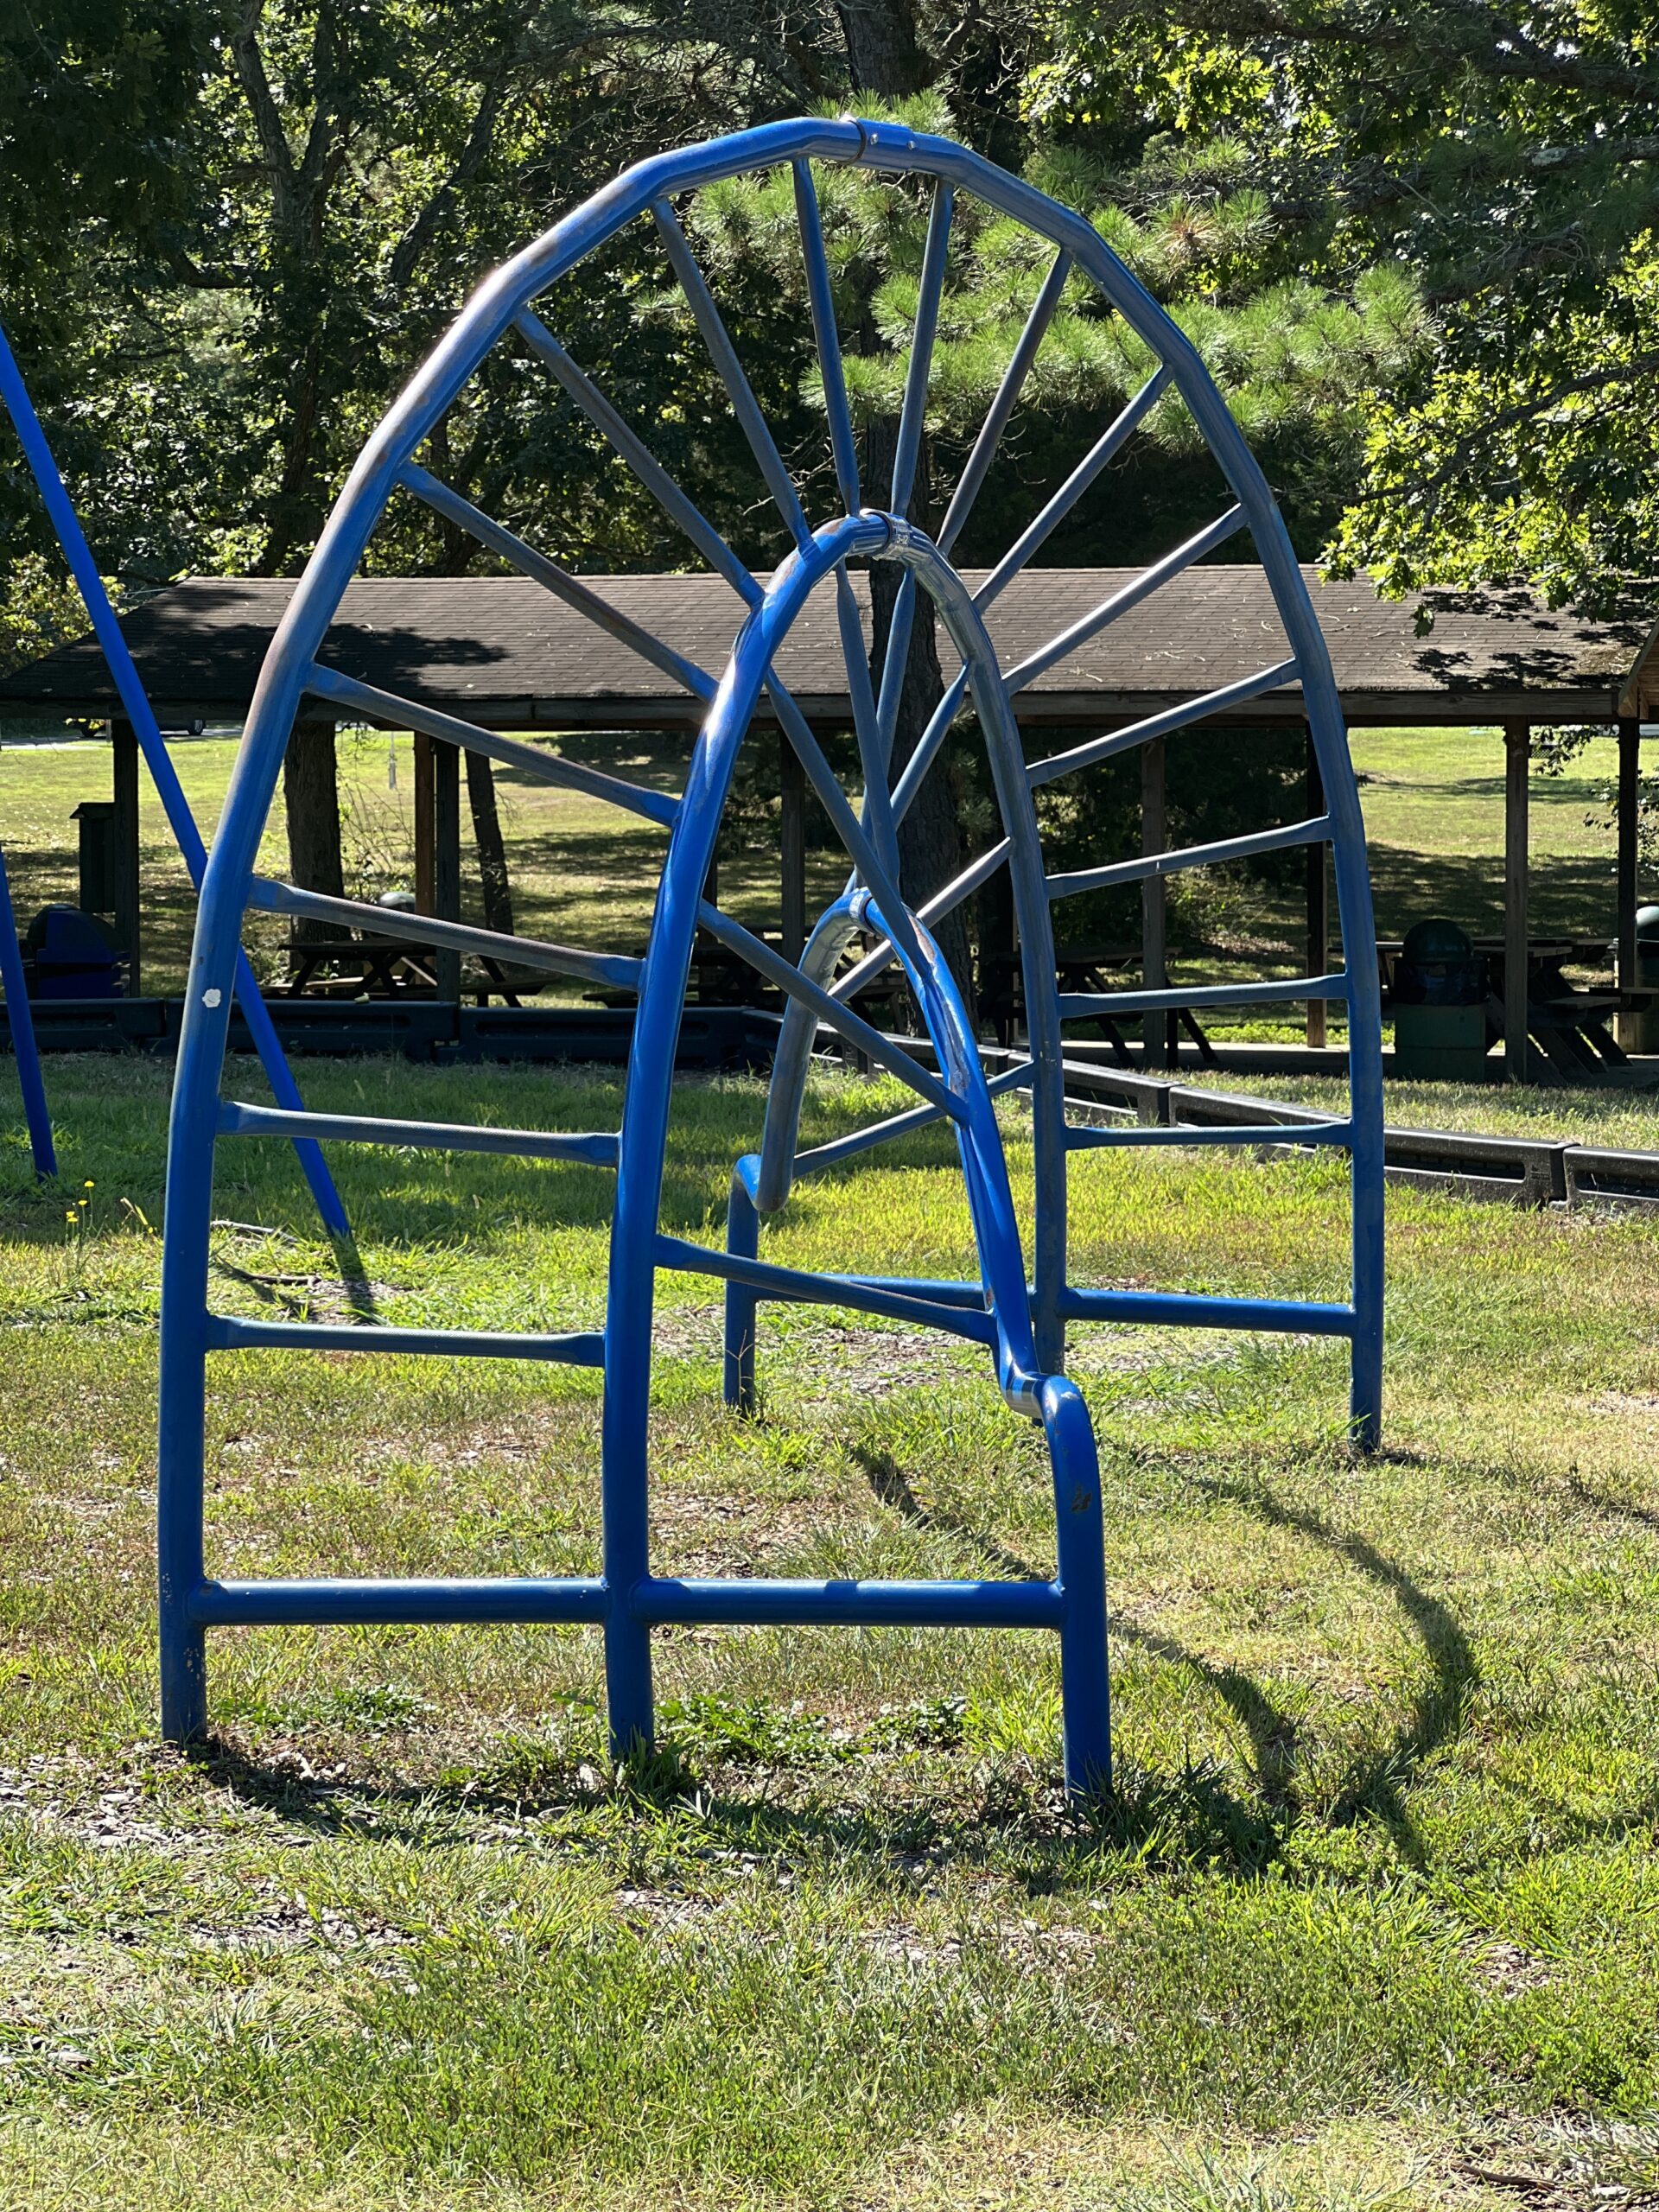 Deer Pen Park Playground in Pittsgrove Township NJ - Features - Climbing arch side BETTER TALL image